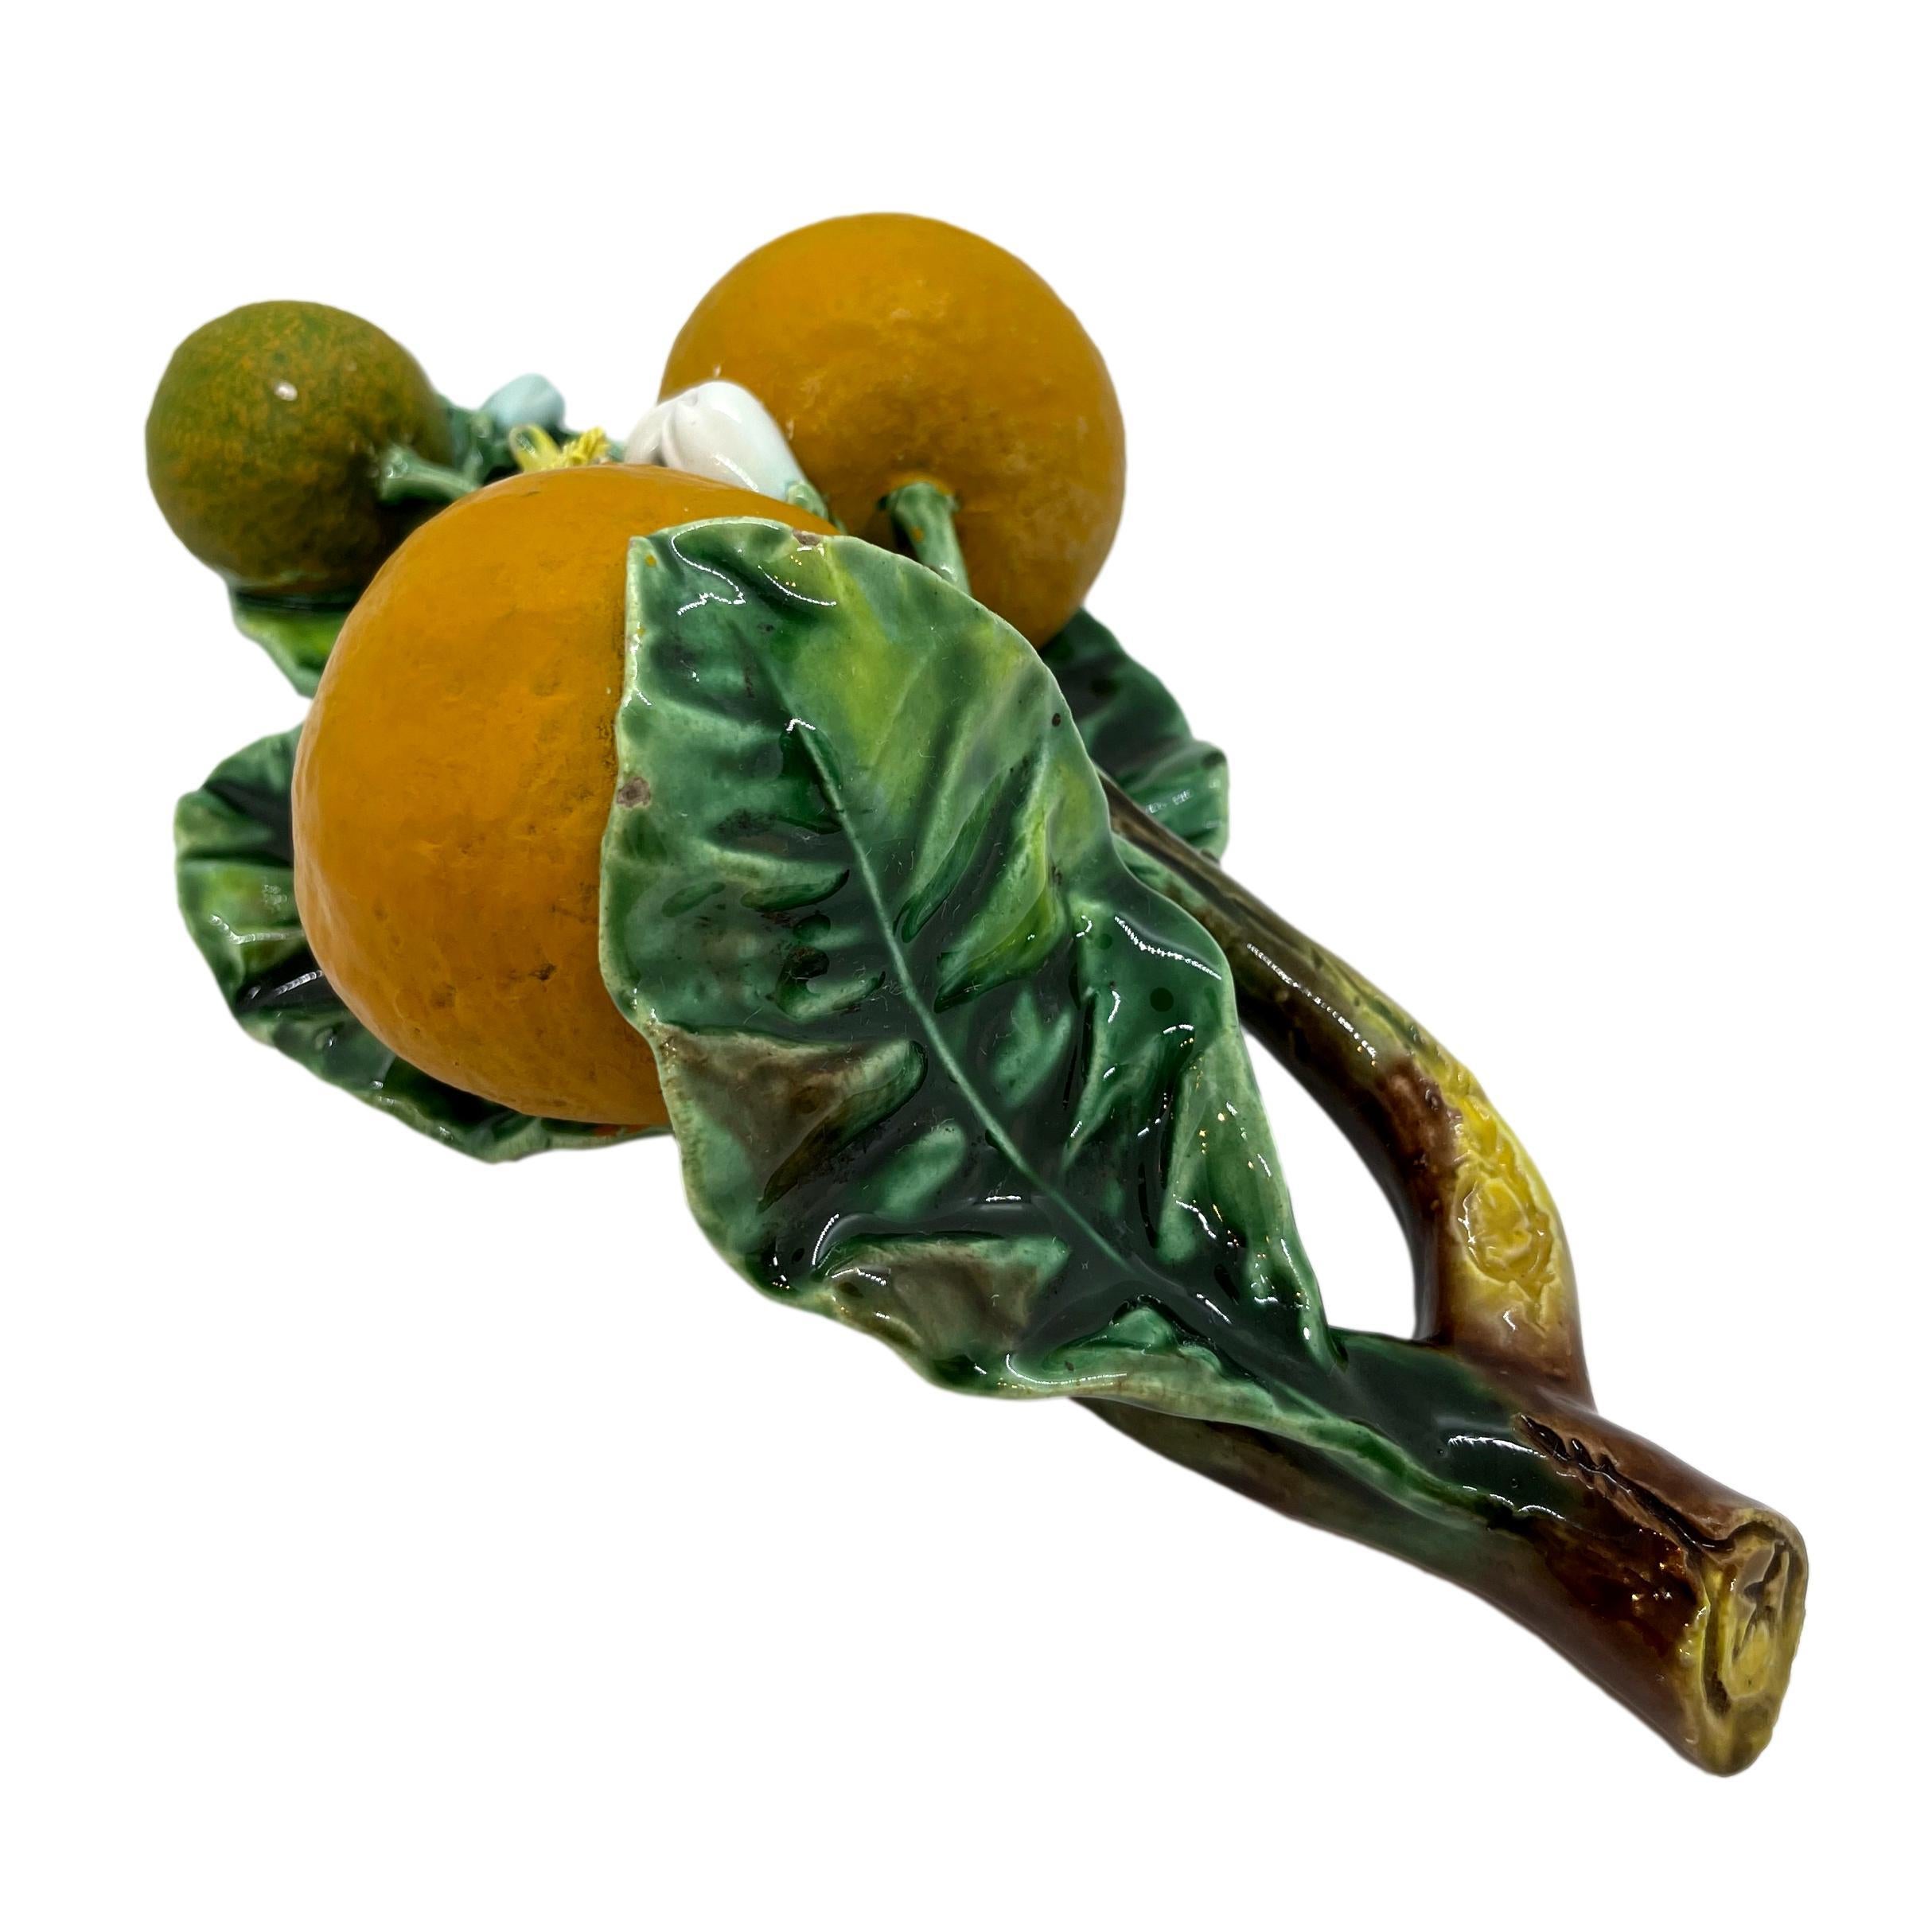 French Large Majolica Trompe L'oeil Wall Plaque with Oranges by Perret-Gentil, Menton For Sale